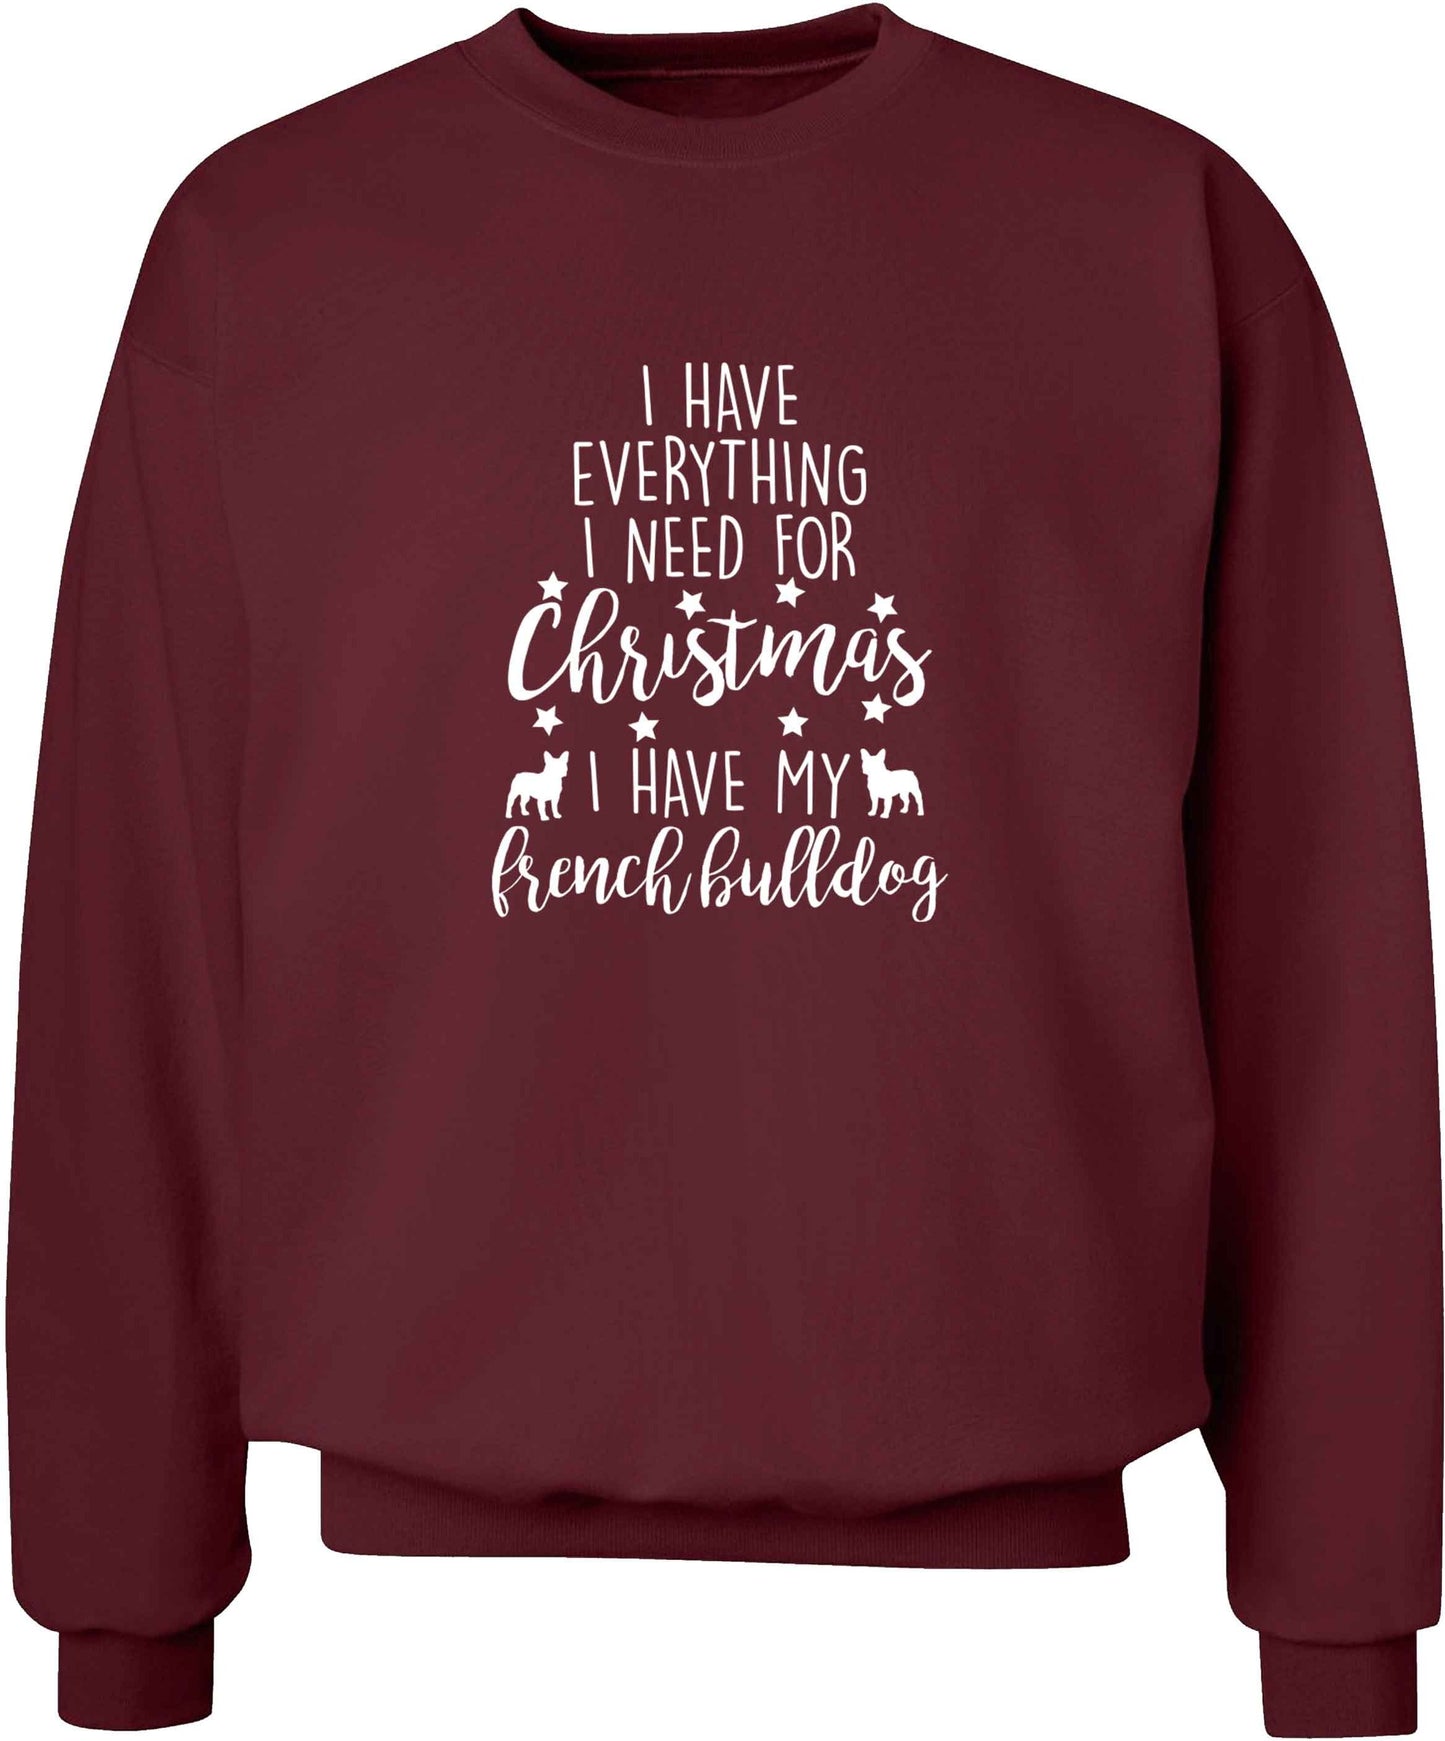 I have everything I need for Christmas I have my french bulldog adult's unisex maroon sweater 2XL